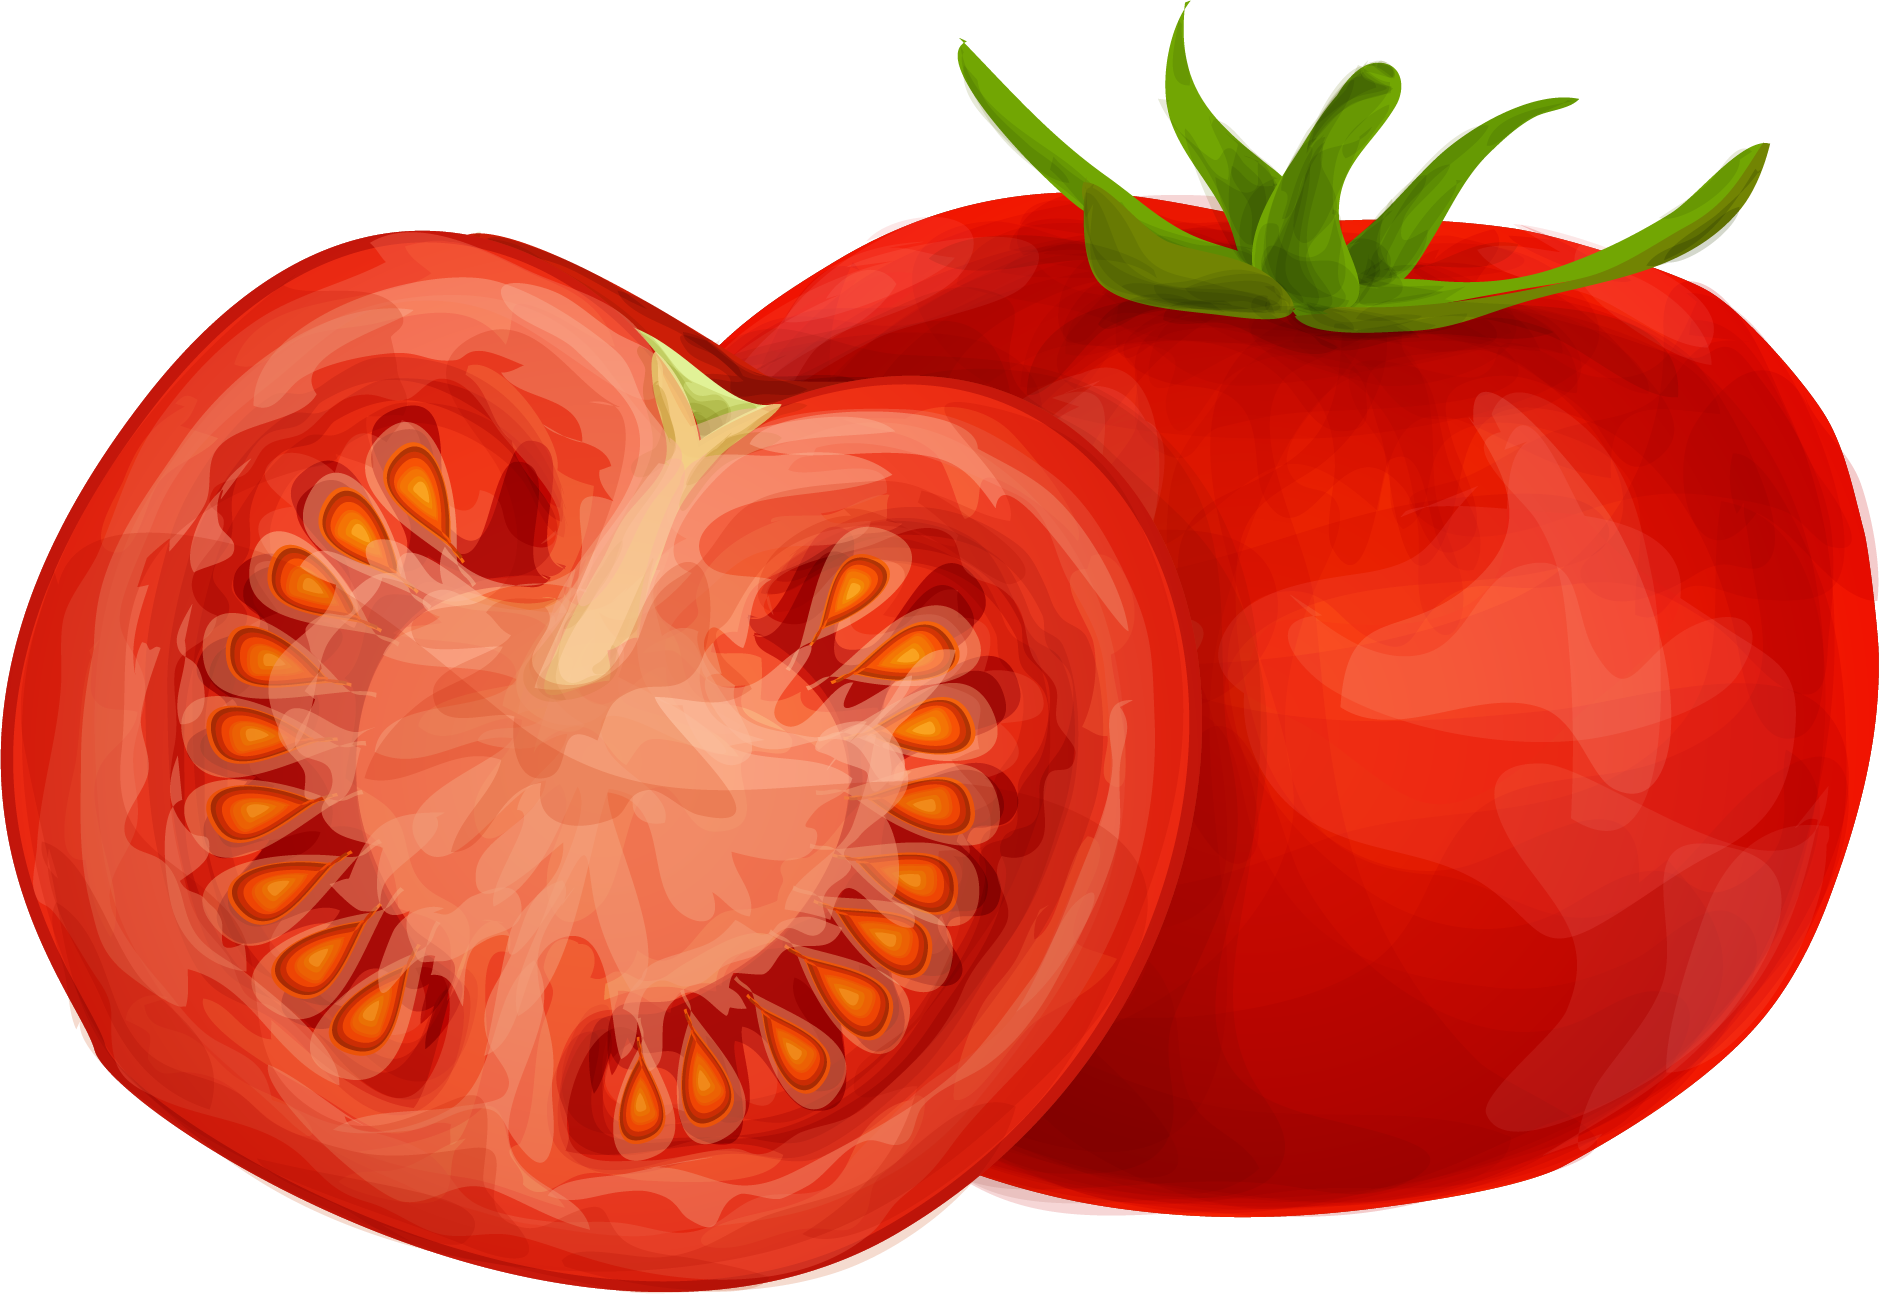 Tomato Clipart PNG Image 01 2